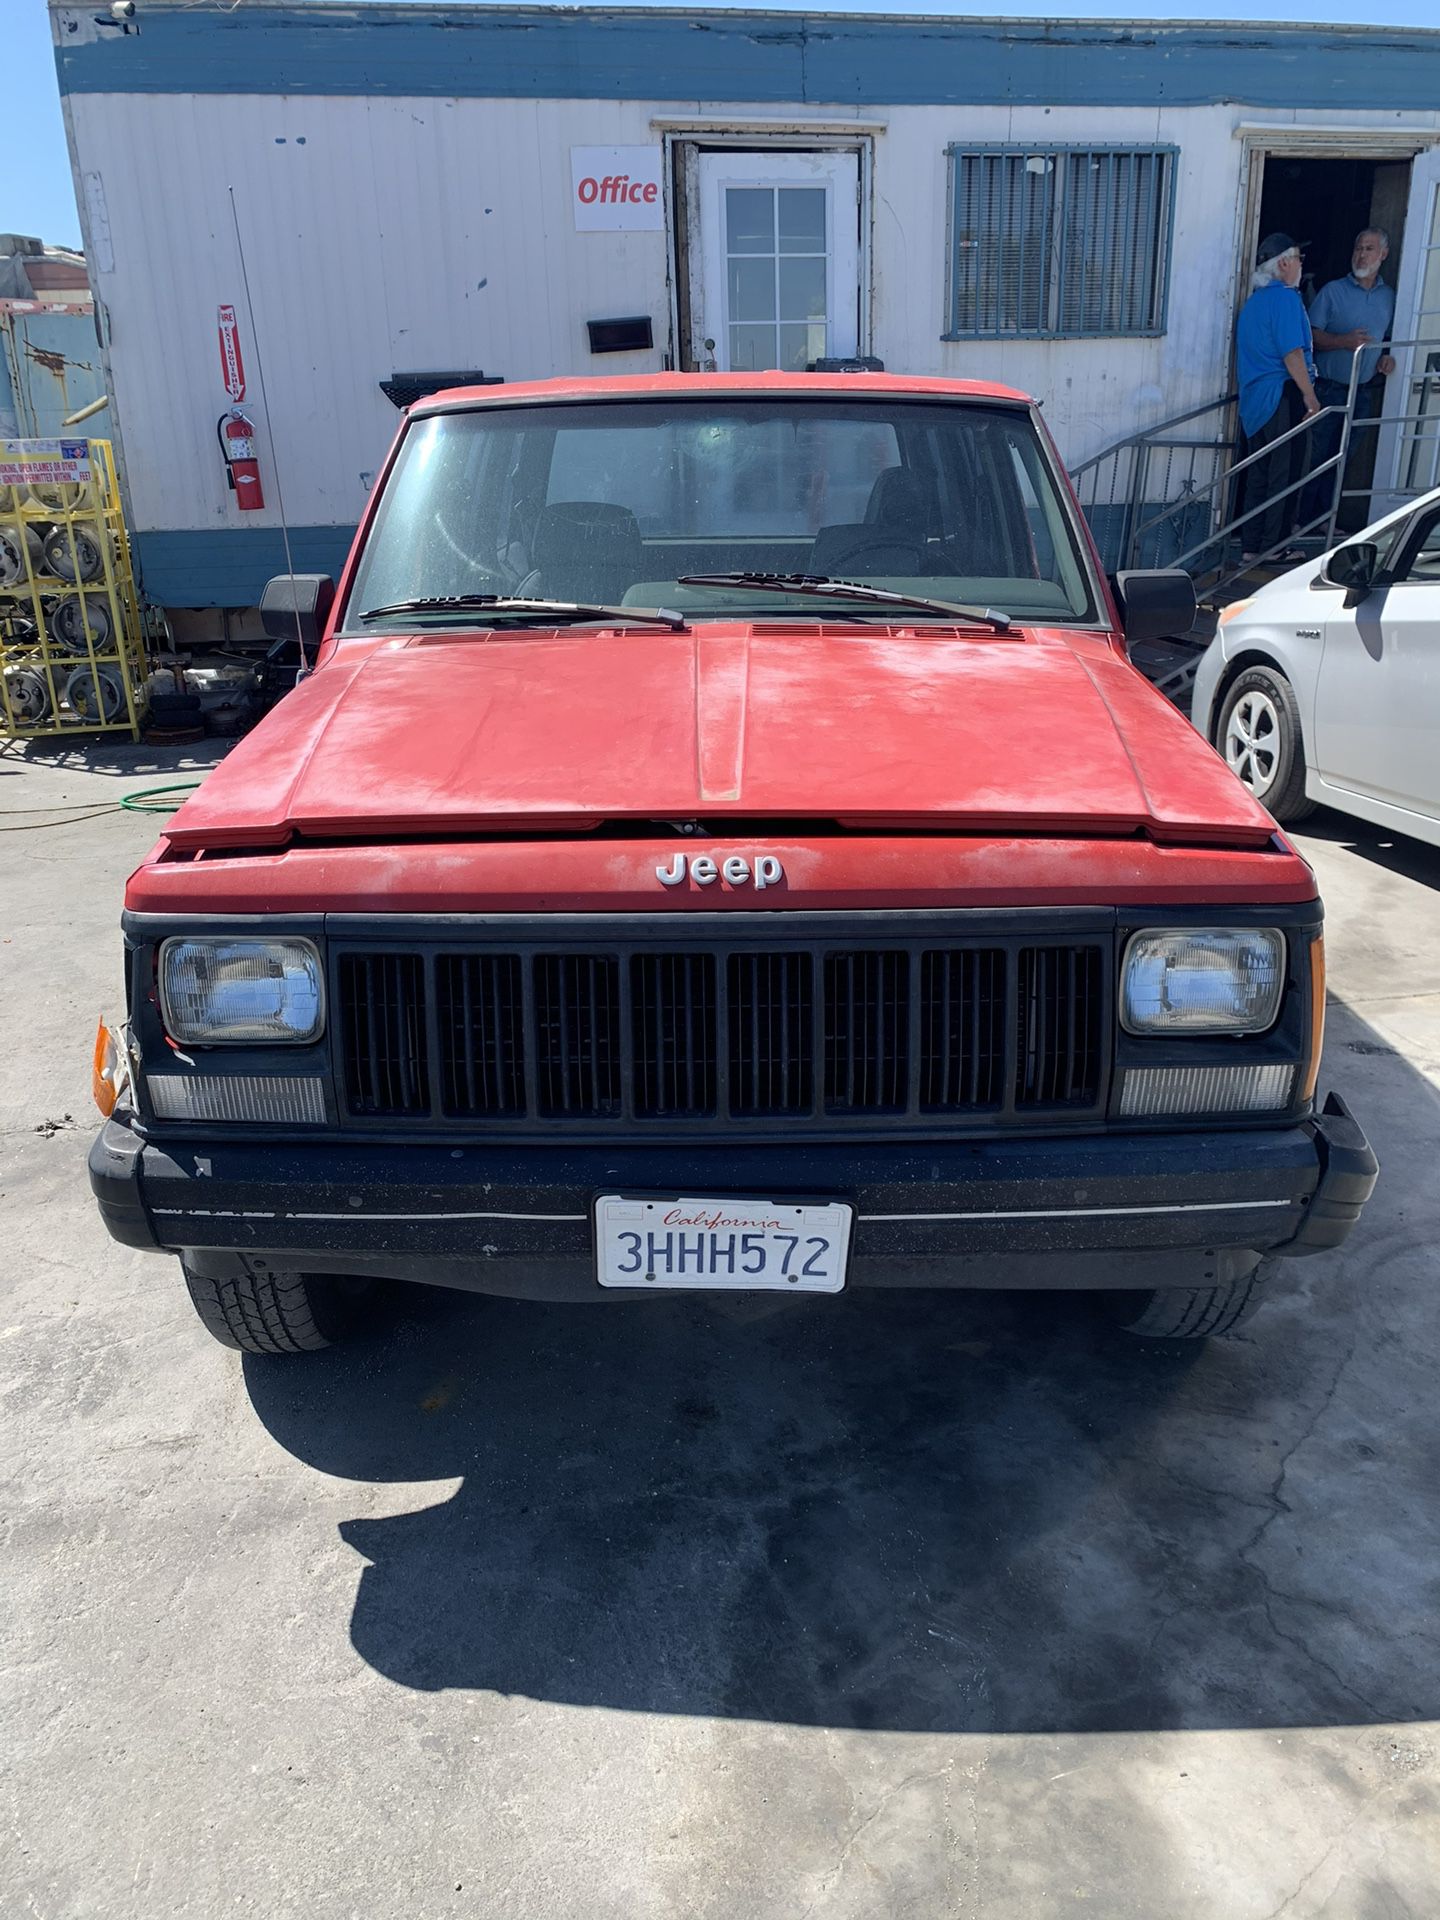 Parts Or Complete 1990 Jeep Cherokee Part